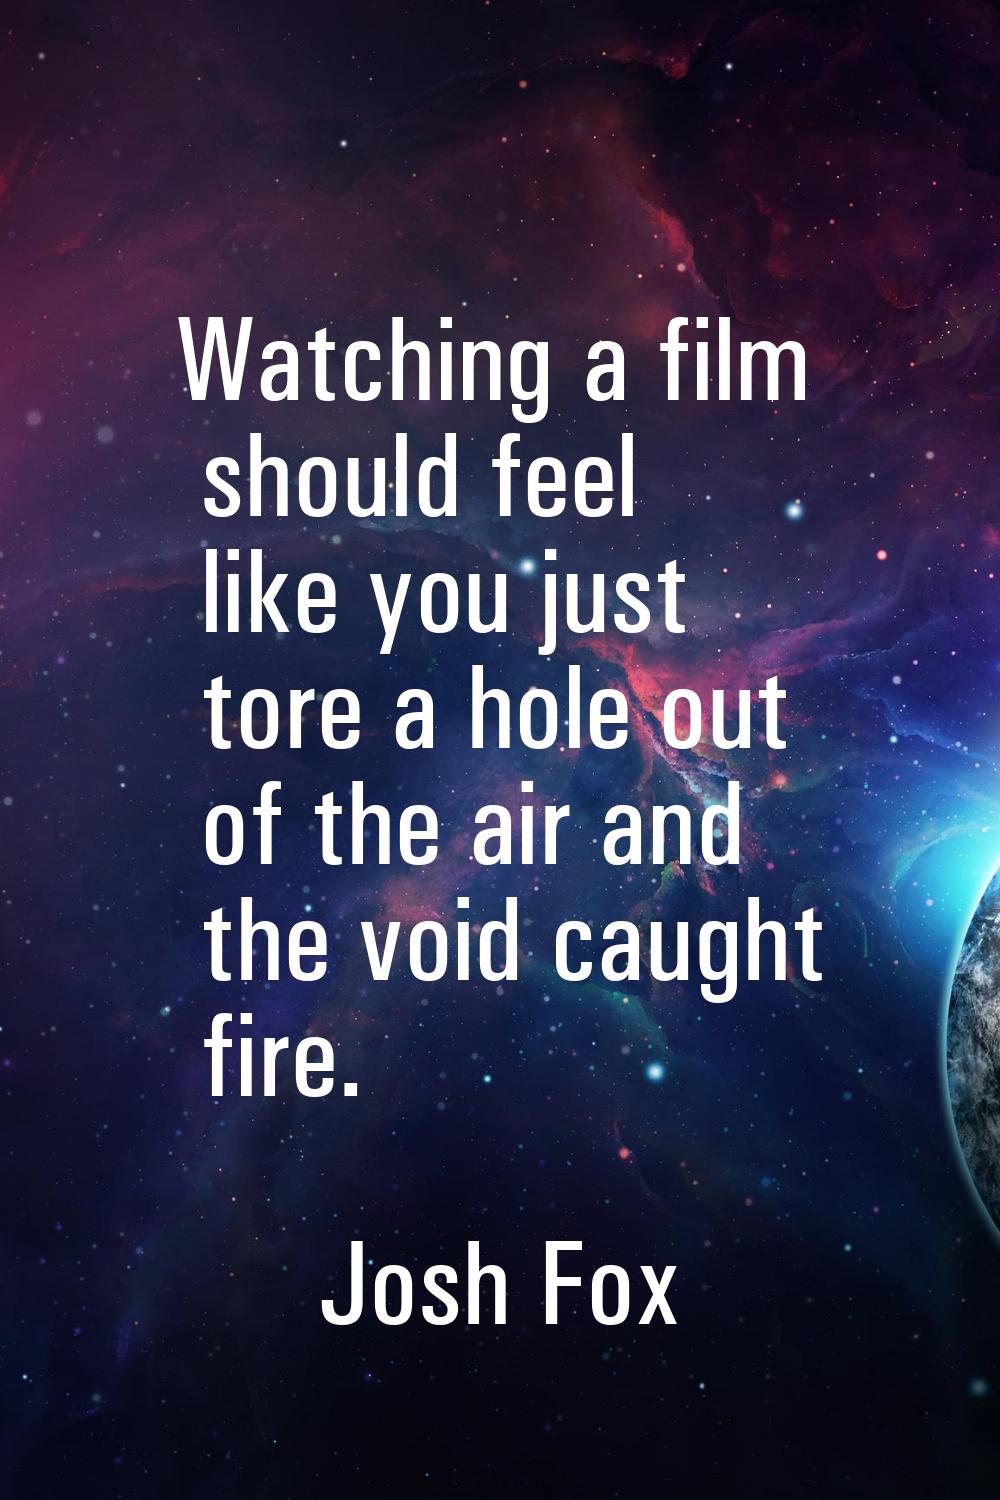 Watching a film should feel like you just tore a hole out of the air and the void caught fire.